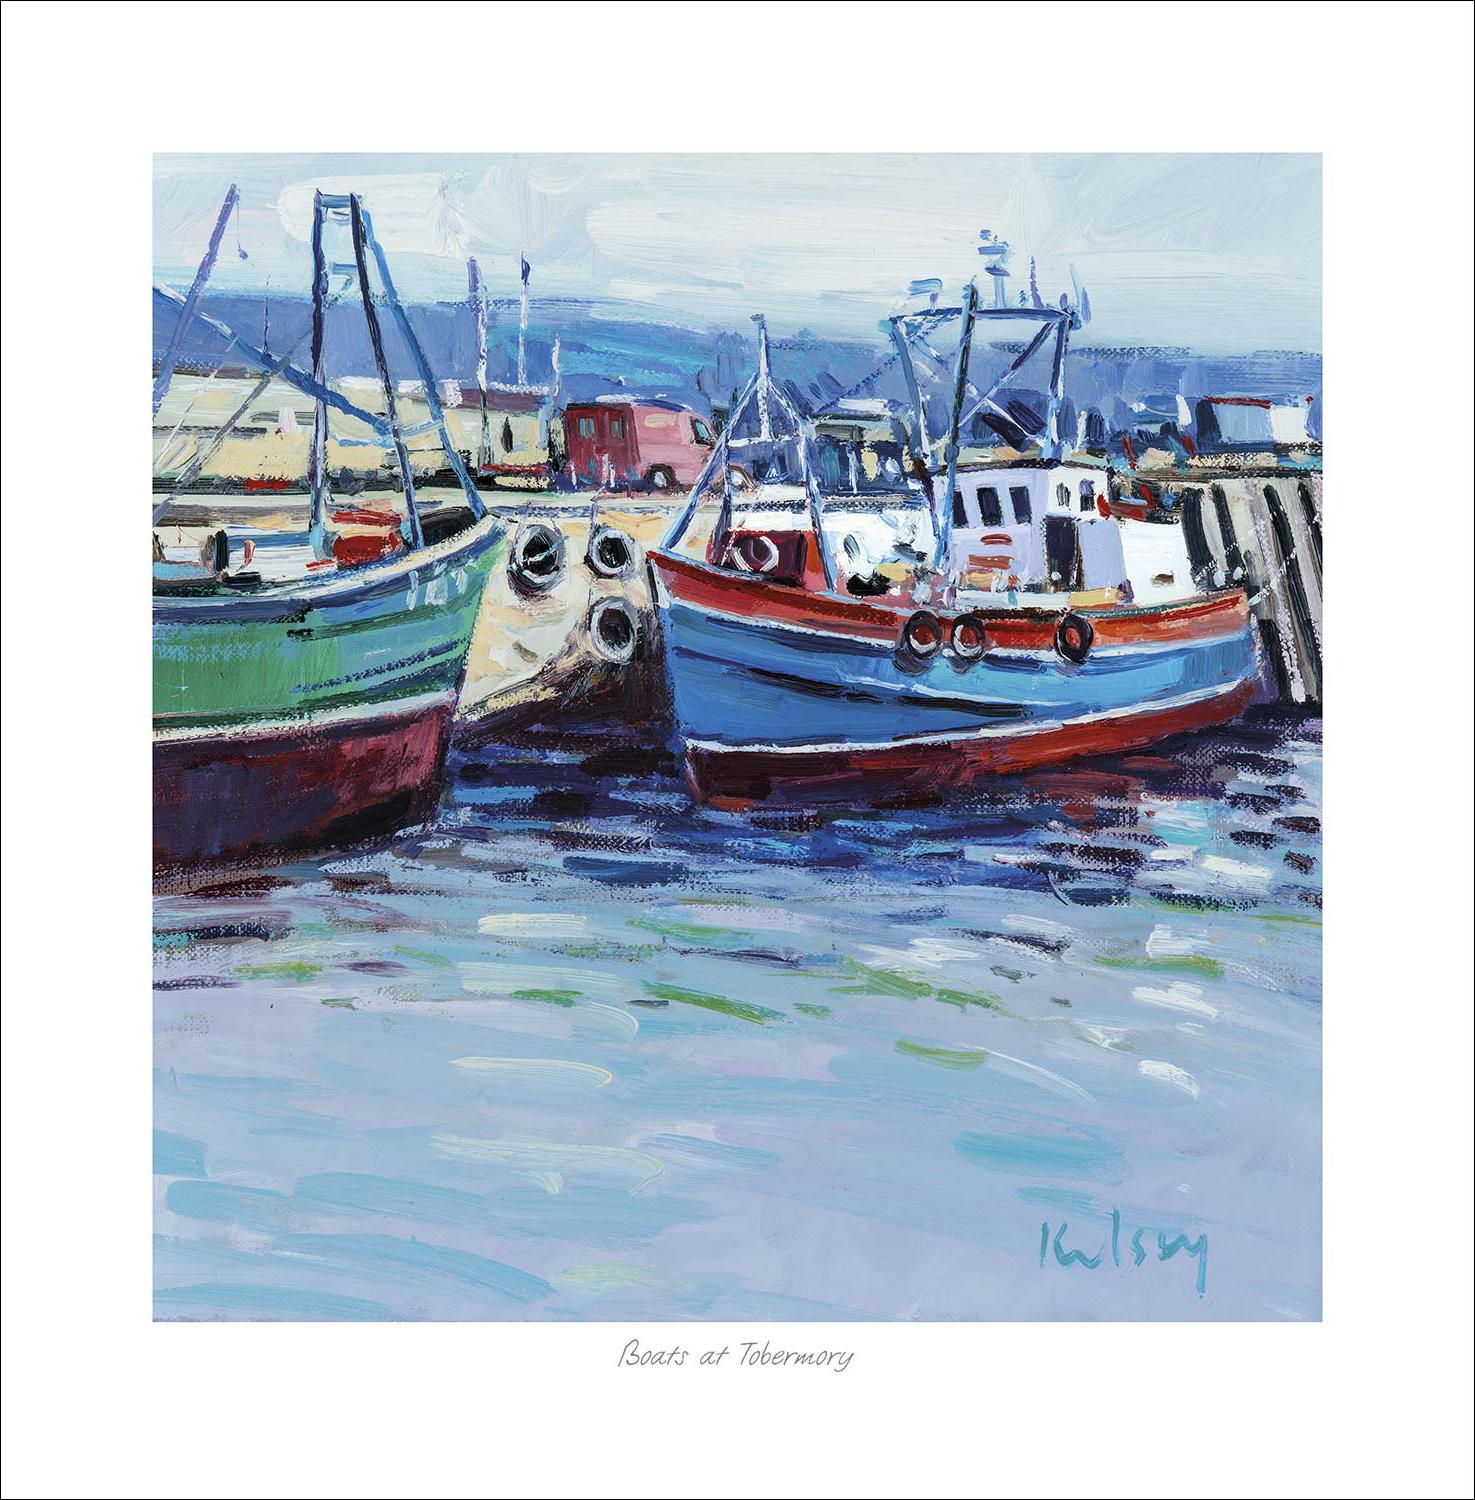 Boats at Tobermory Art Print from an original painting by artist Robert Kelsey